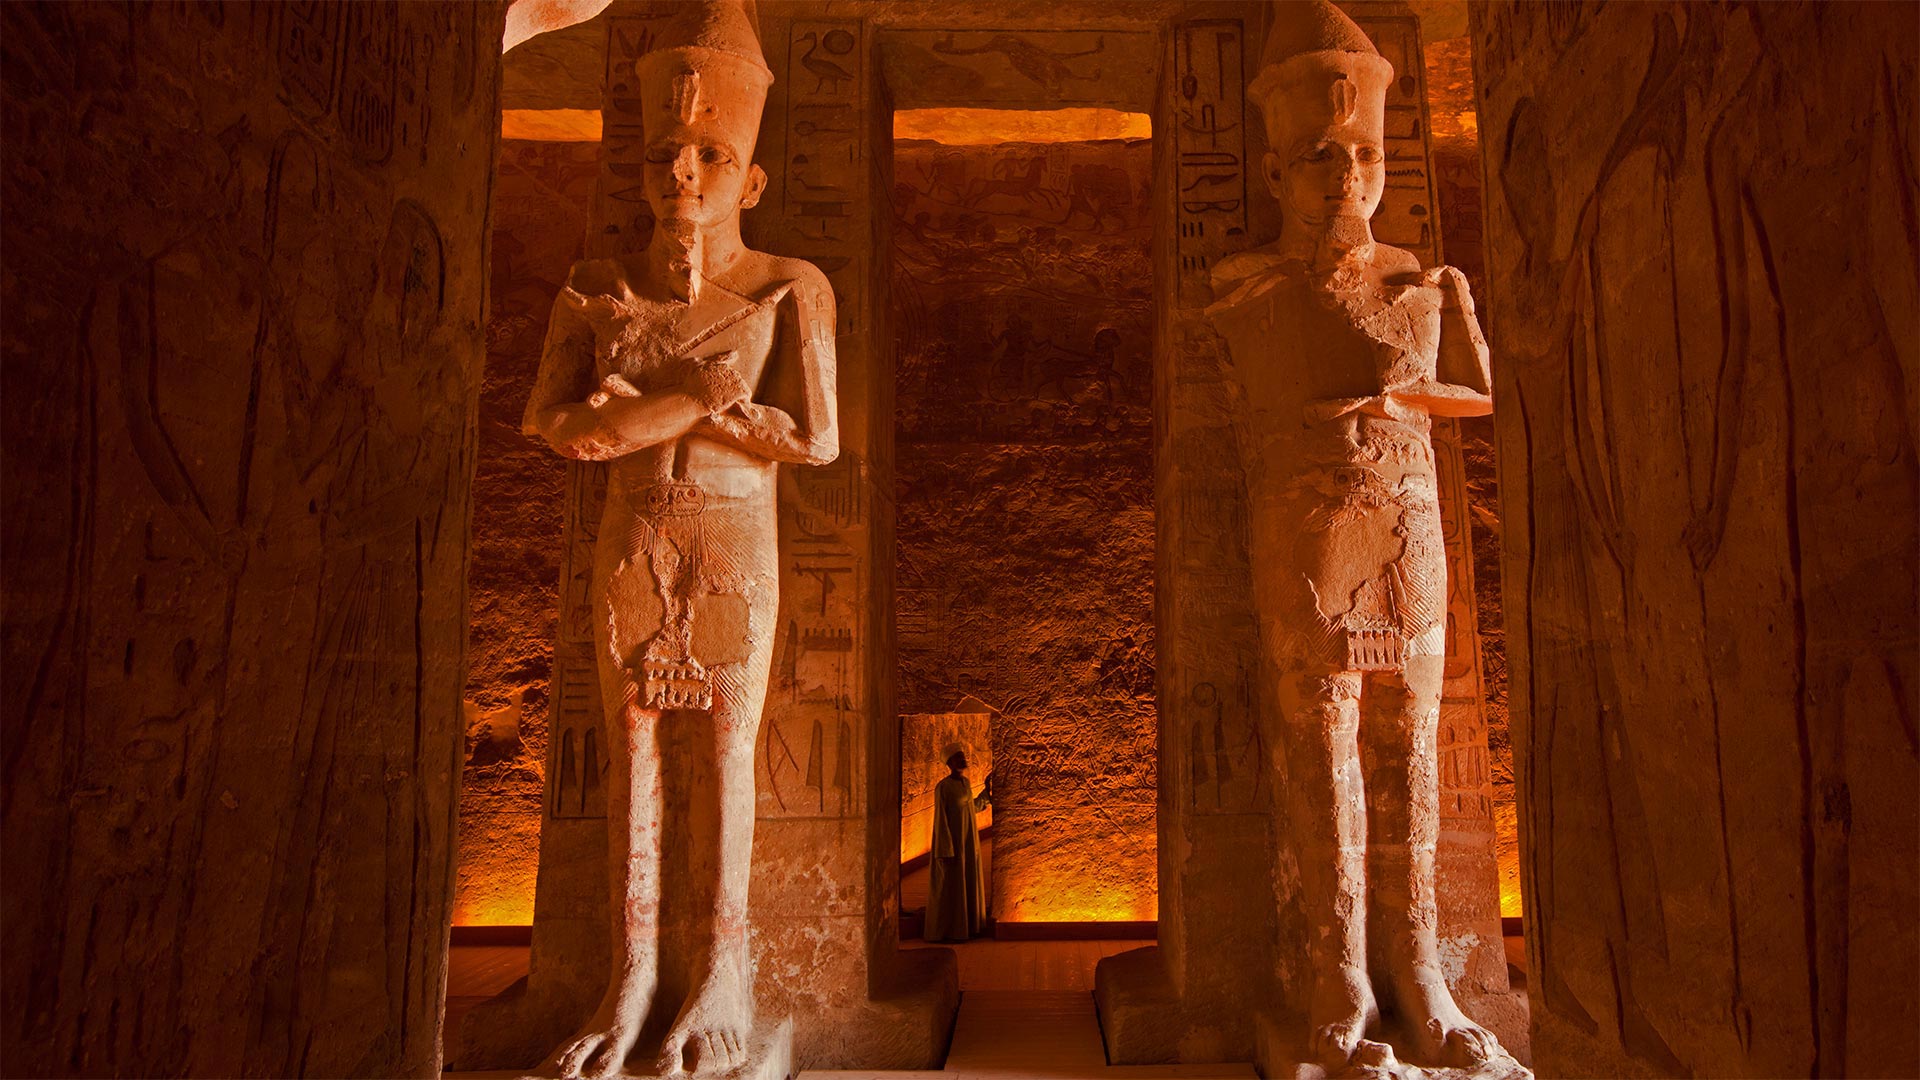 The interior of the Great Temple at Abu Simbel, Egypt - George Steinmetz/Getty Images)